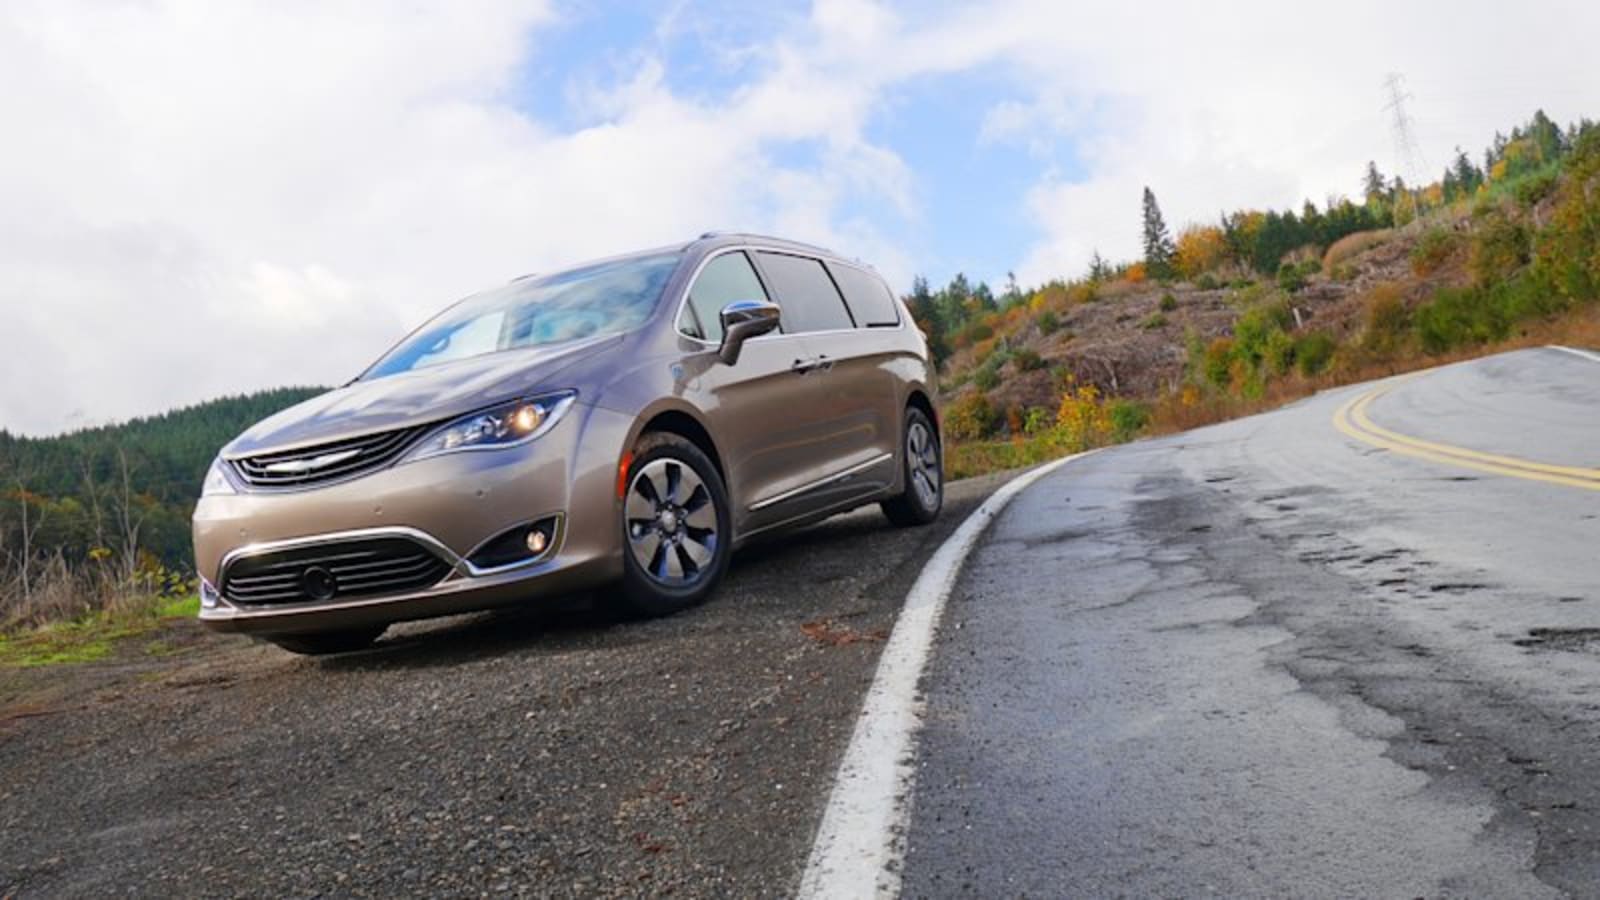 2021 Chrysler Pacifica and Pacifica Hybrid Review | Price, specs, features